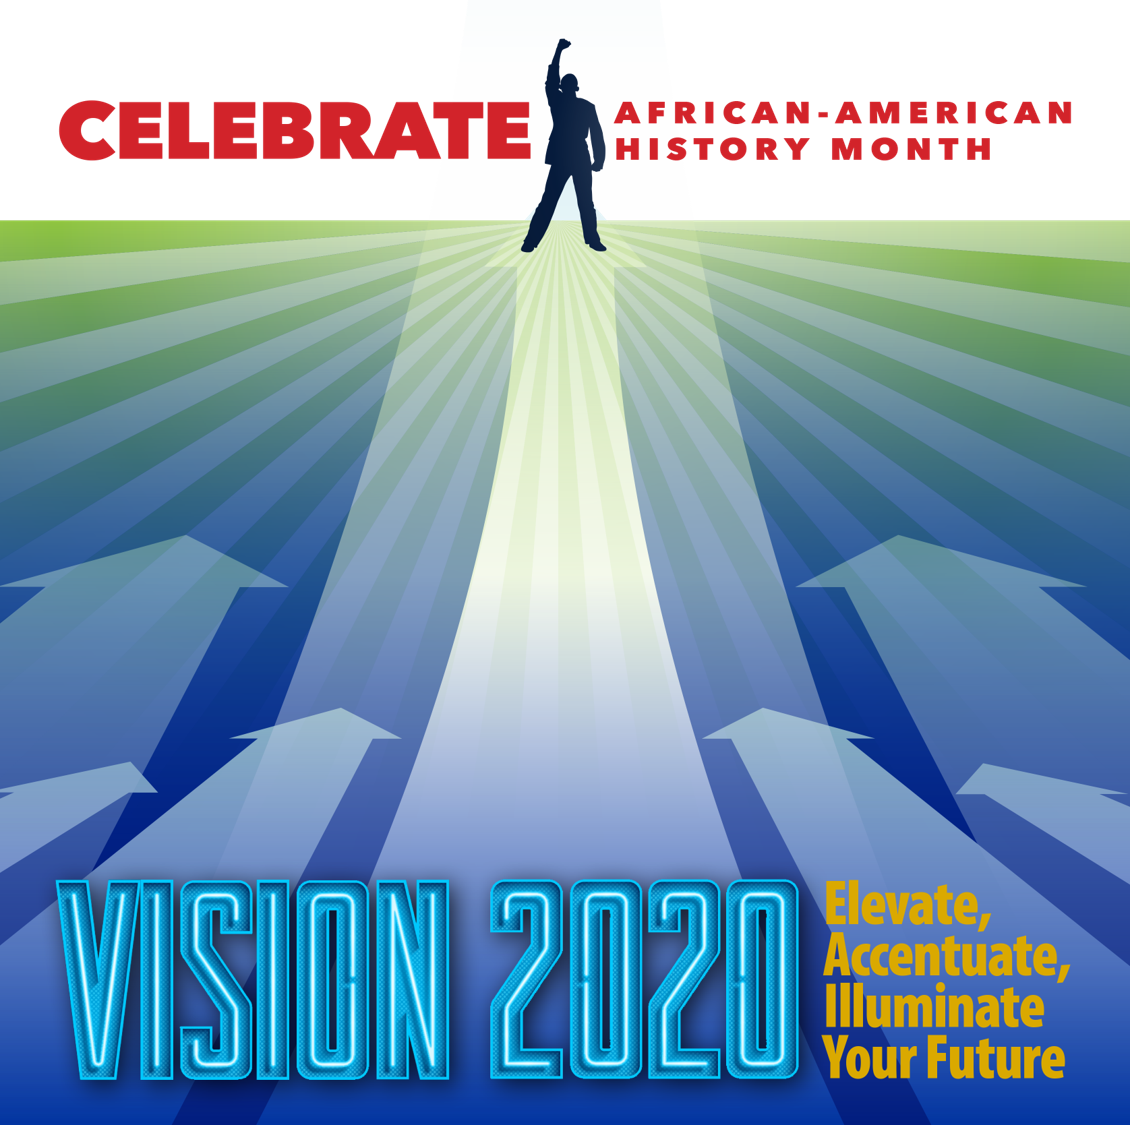 Celebrate African-American History Month. Vistion 2020: Elevate, Accentuate, Illuminate Your Future